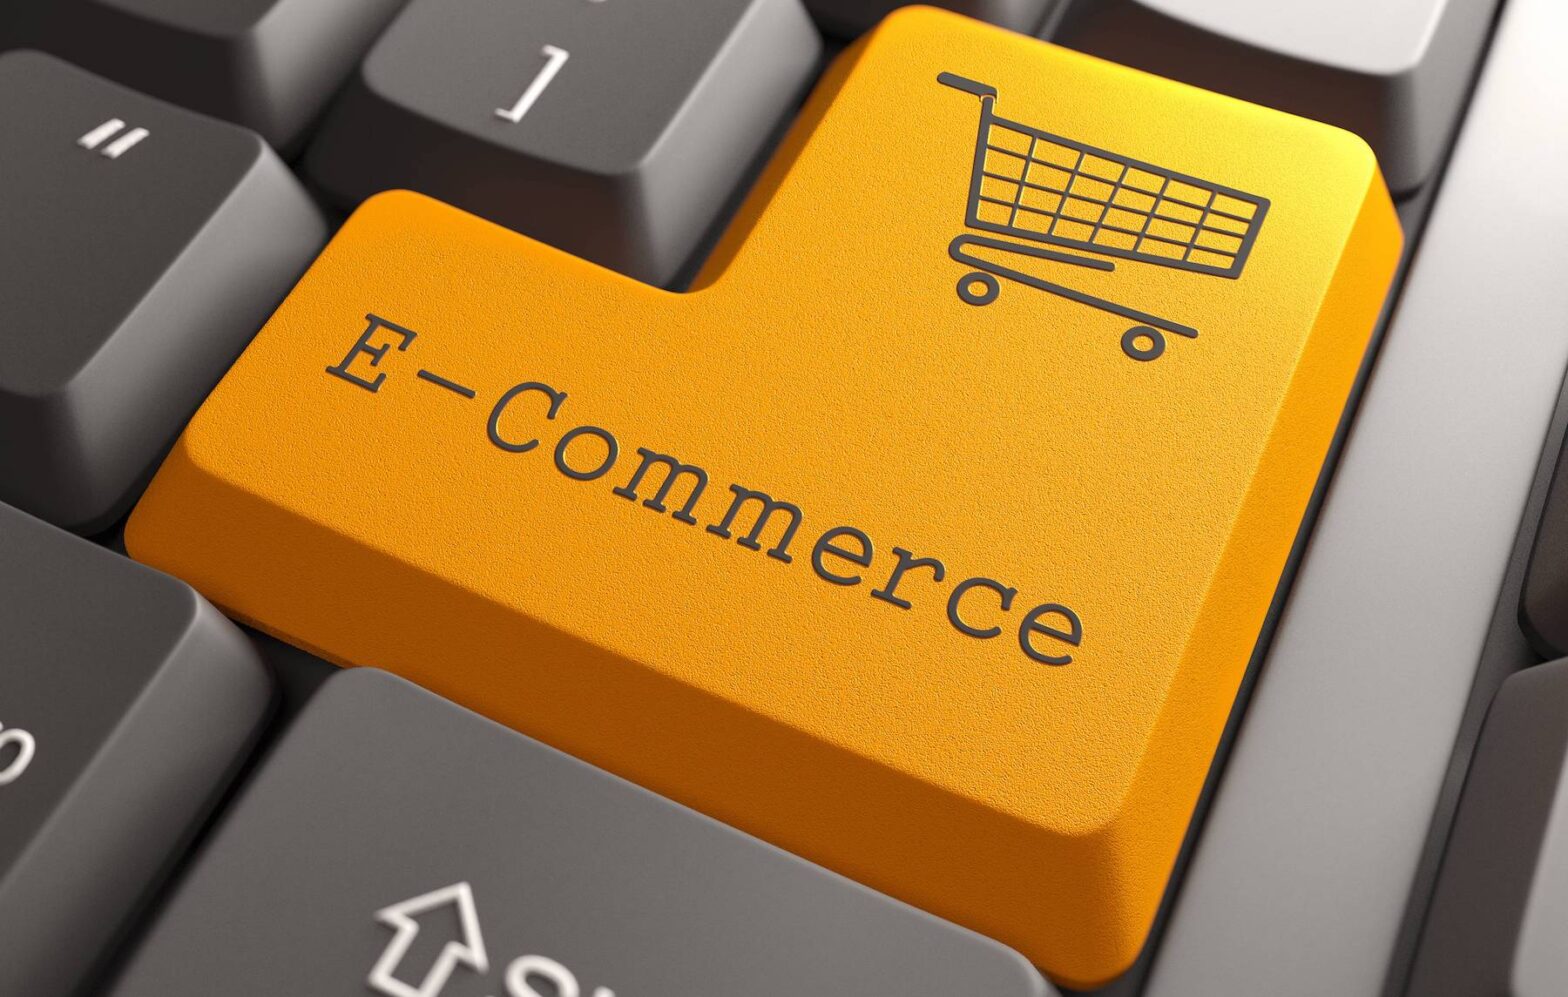 India’s e-commerce market projected to touch $111 billion by 2024: Report